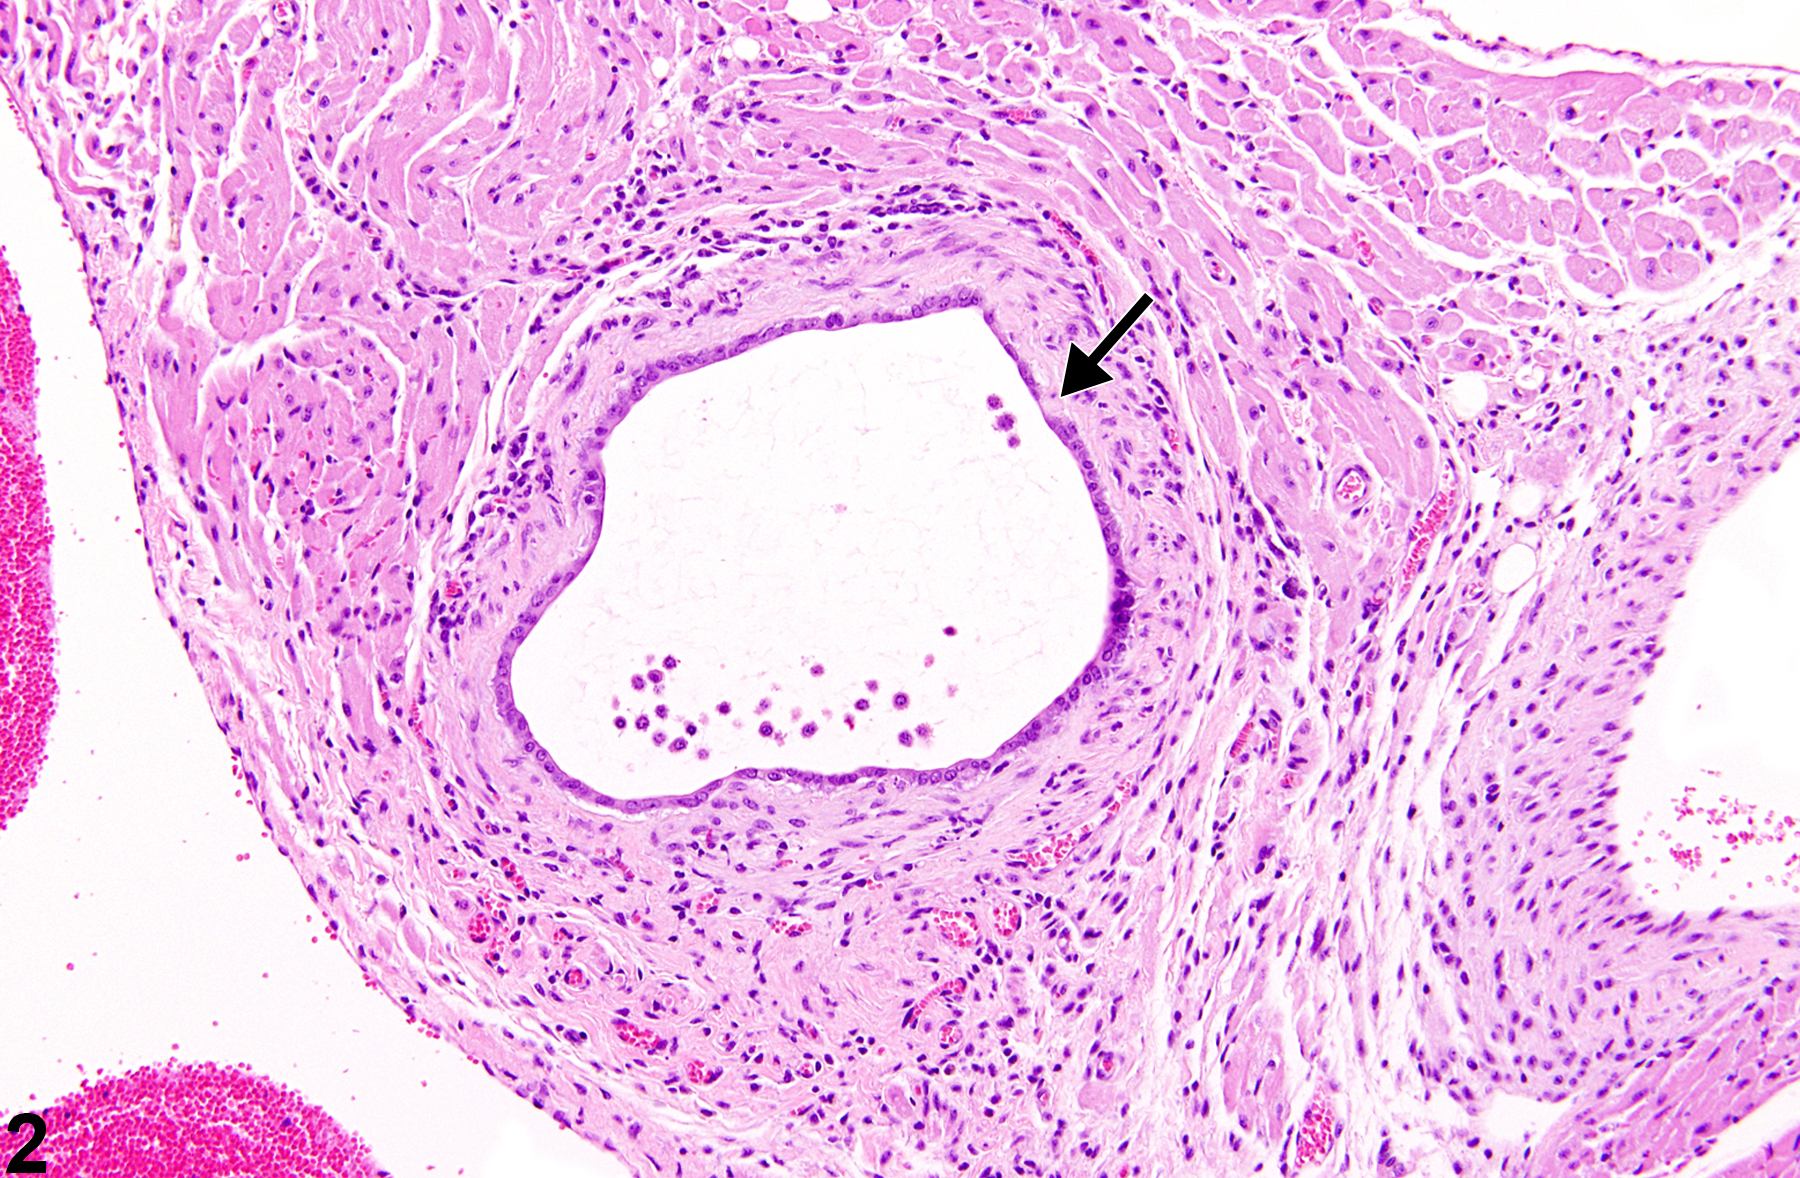 Image of cyst in the heart from a male BALB/c mouse in a subchronic study